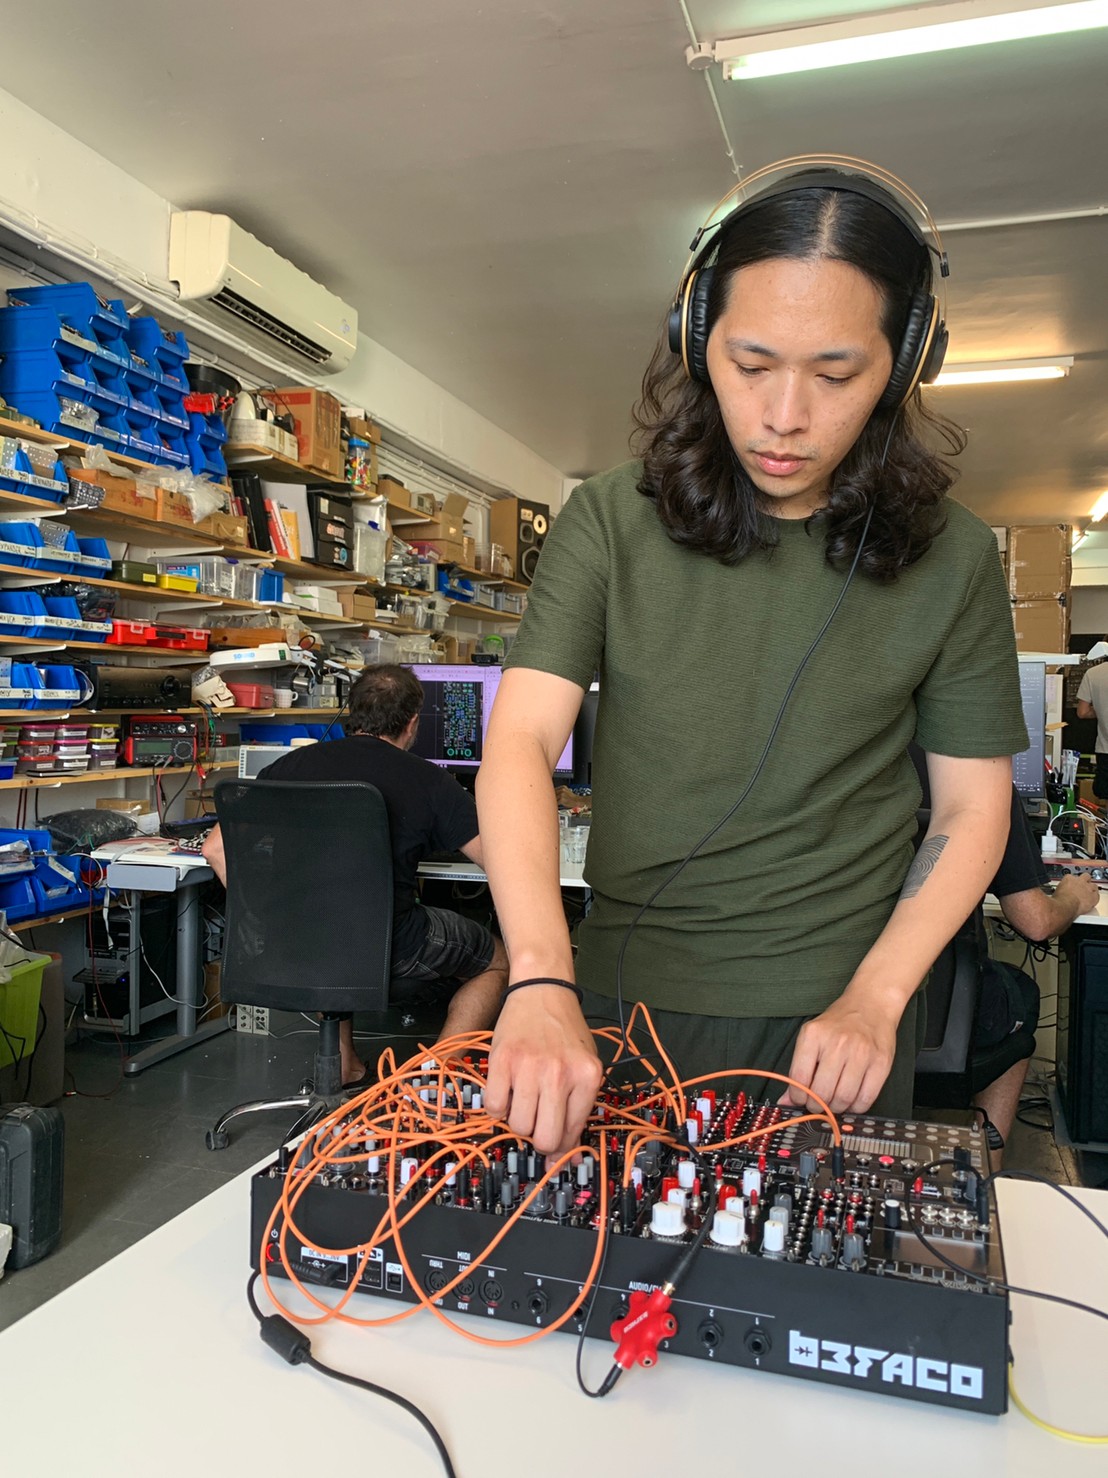 A visit to a local modular synthesizer studio.